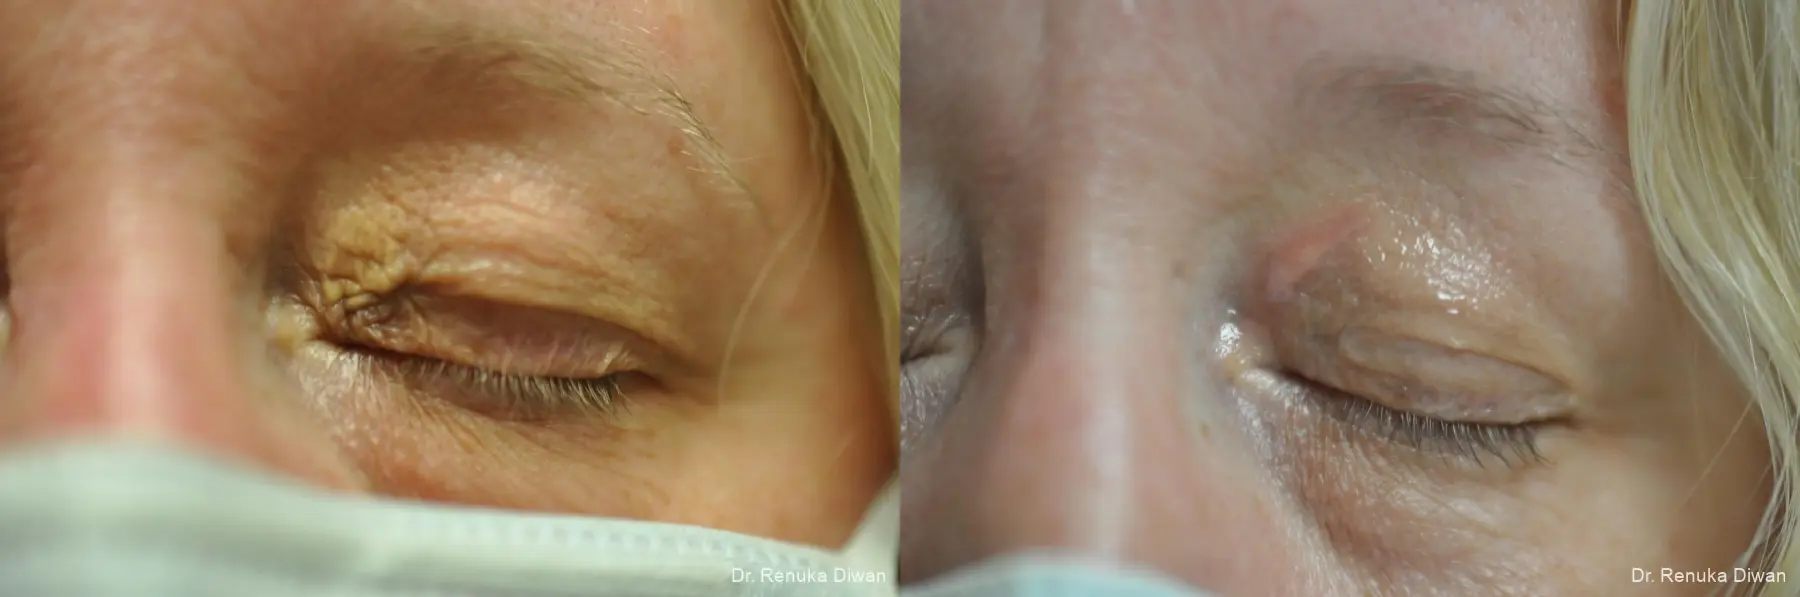 Fractional Resurfacing: Patient 1 - Before and After 1